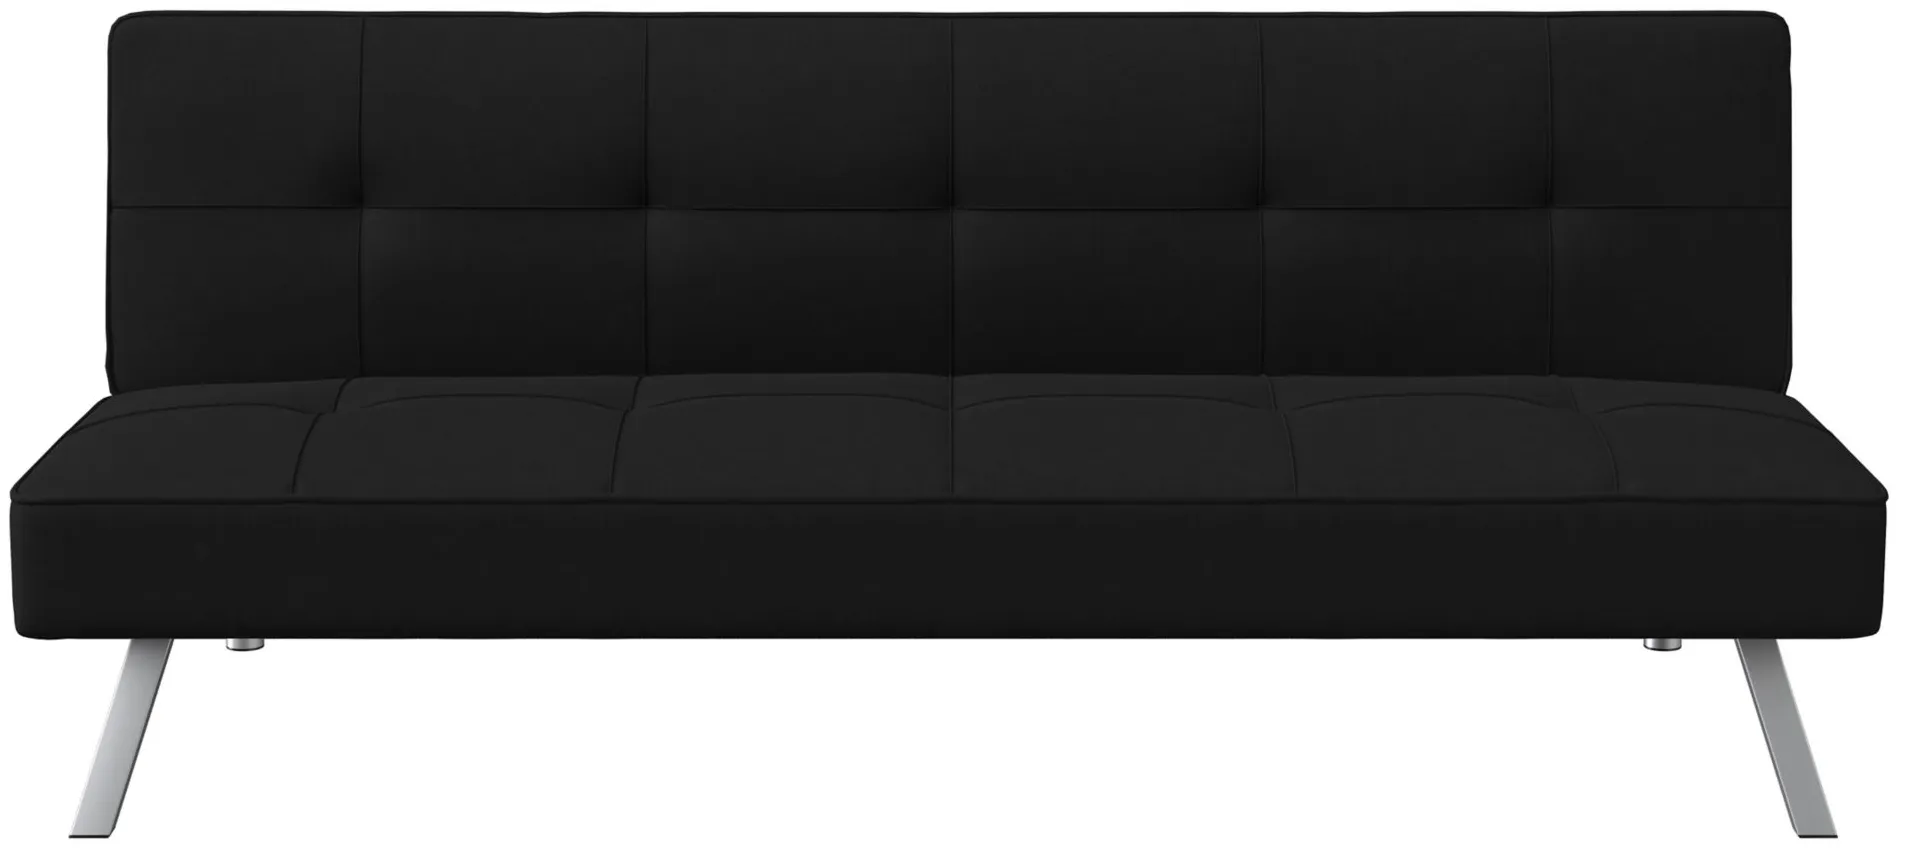 Chester Convertible Futon in Black by Lifestyle Solutions